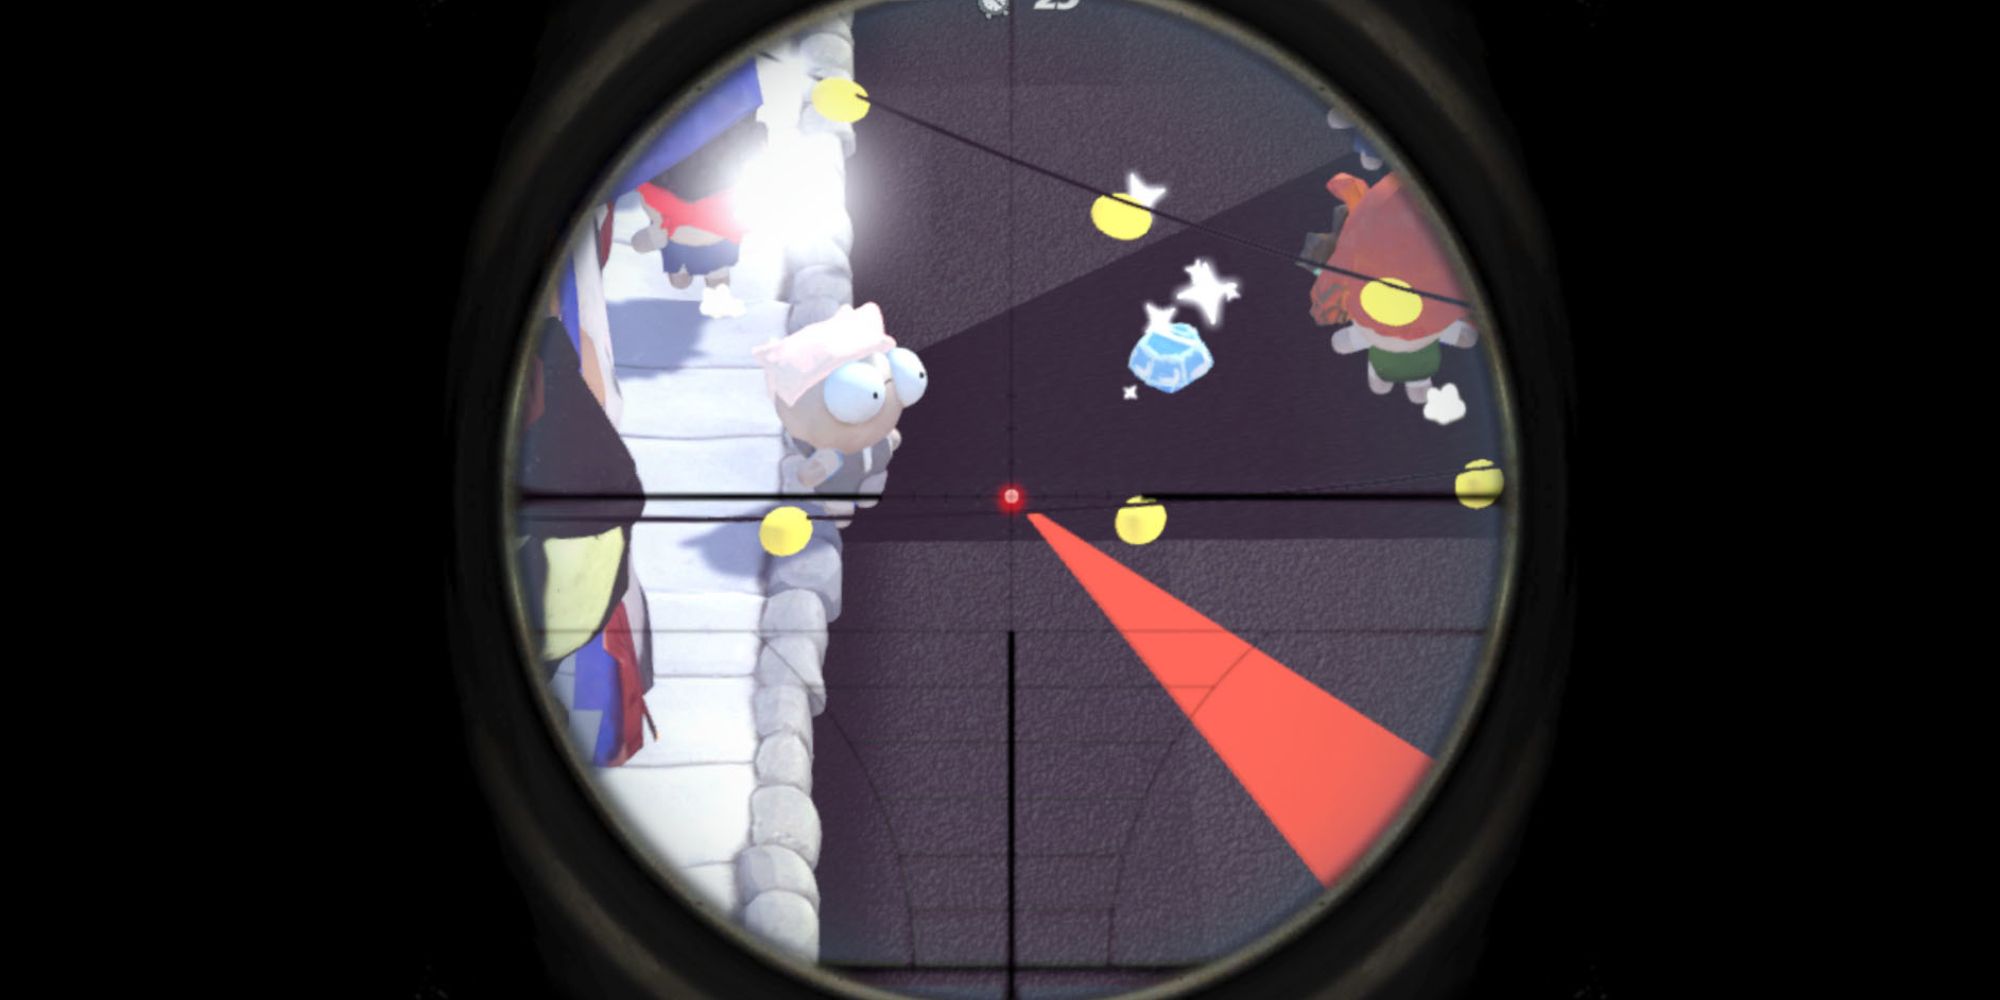 viewing through a scope onto a player